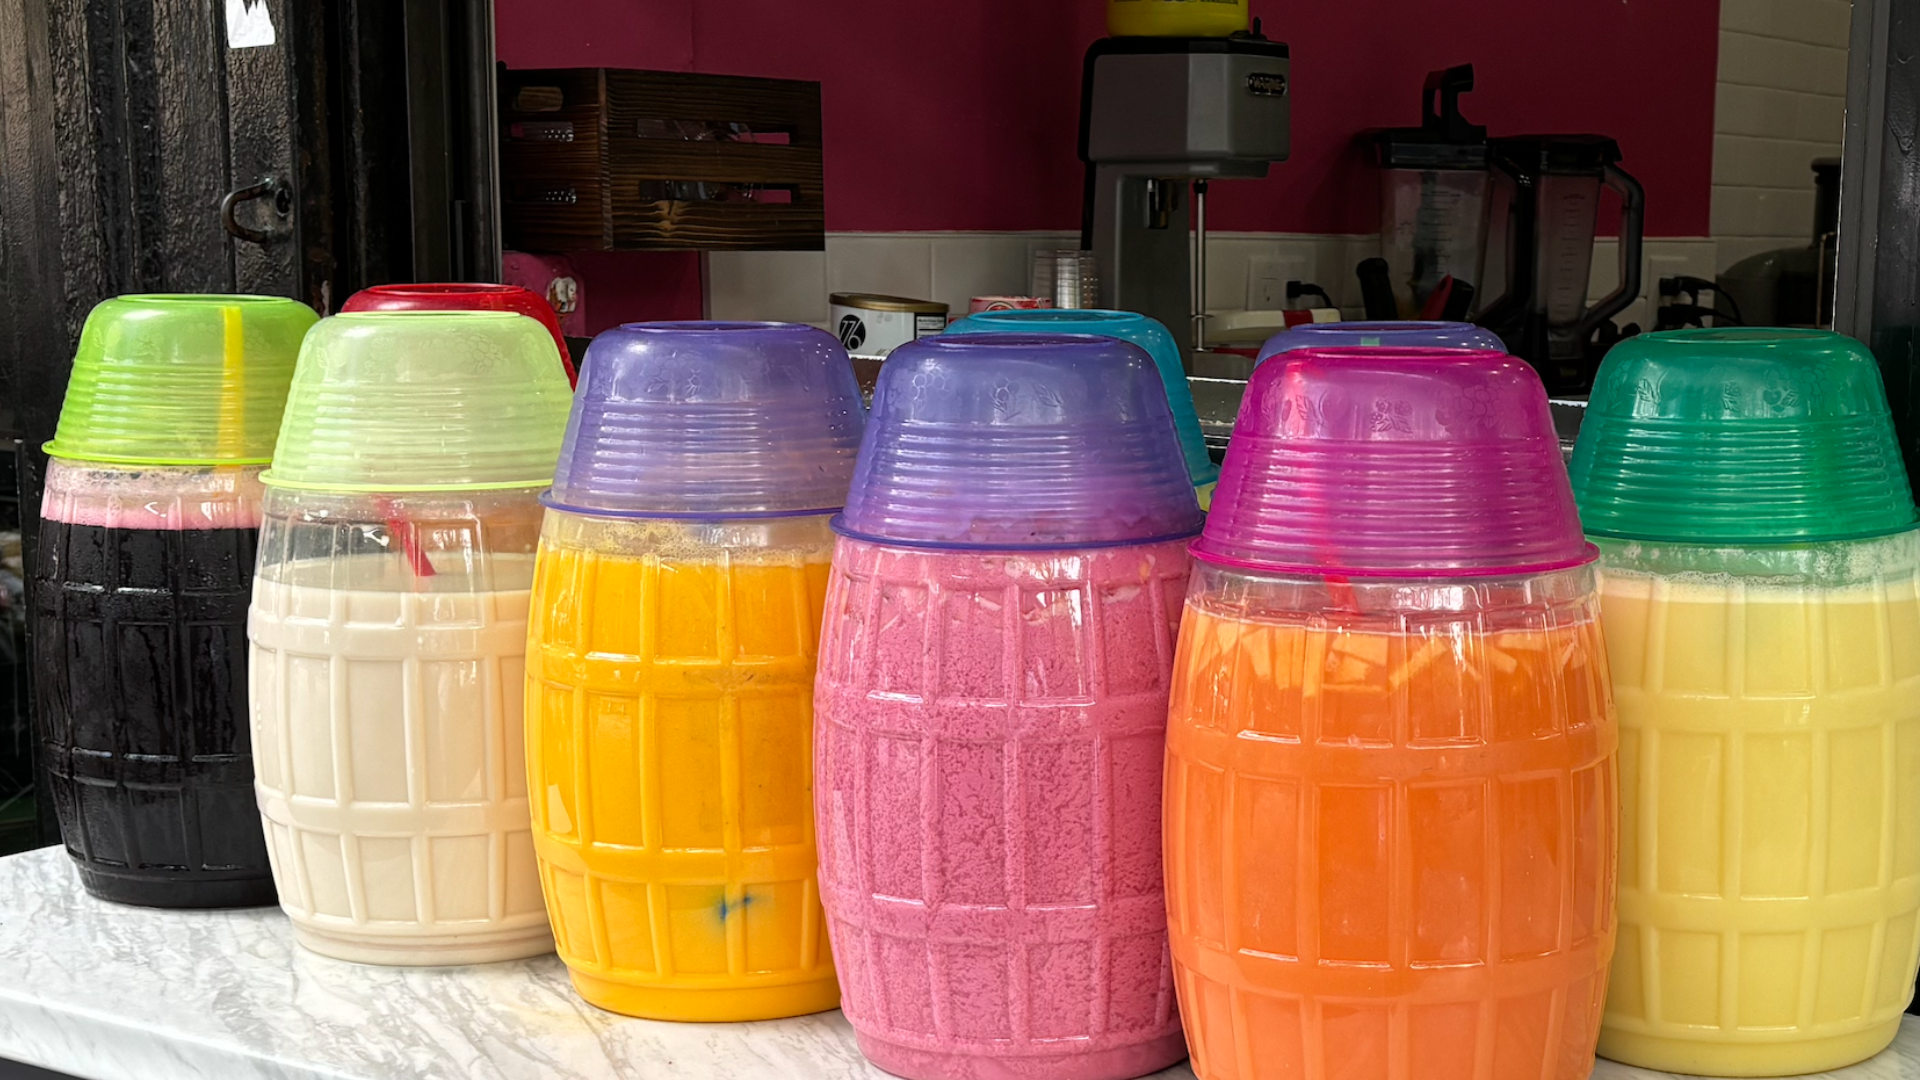 clear plastic barrels will brightly colored juices inside